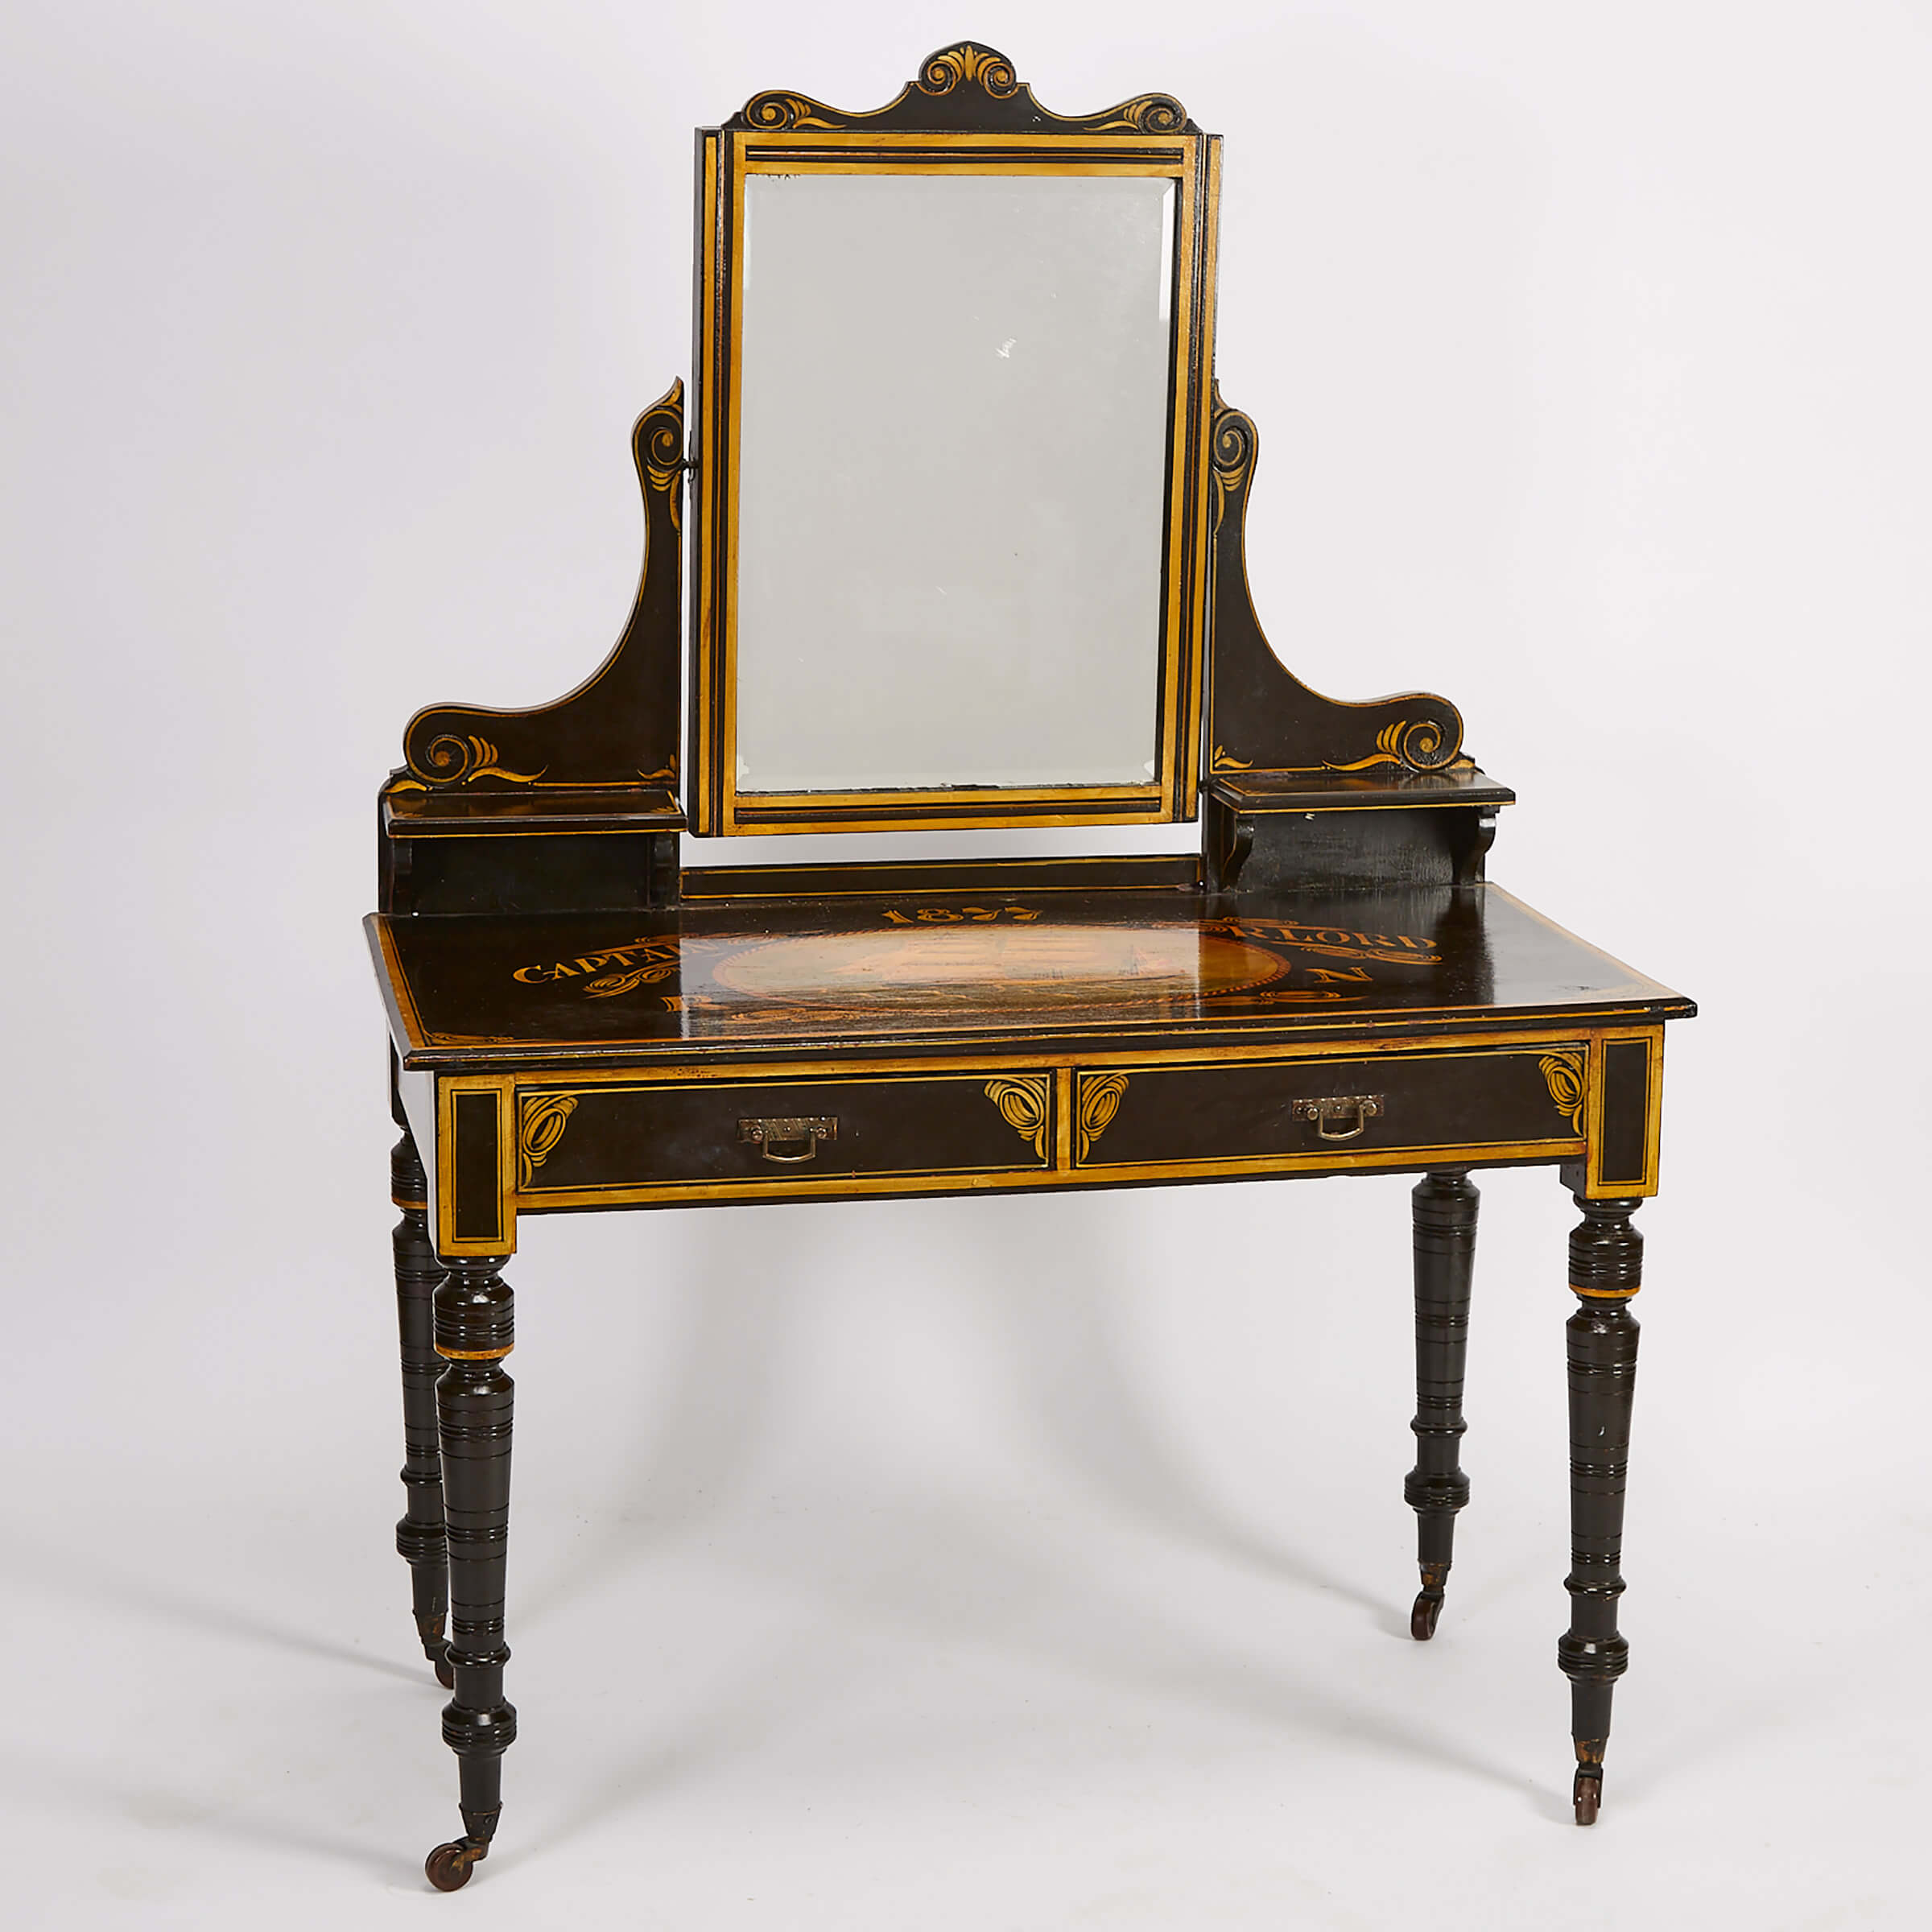 Victorian Painted Vanity, late 19th century